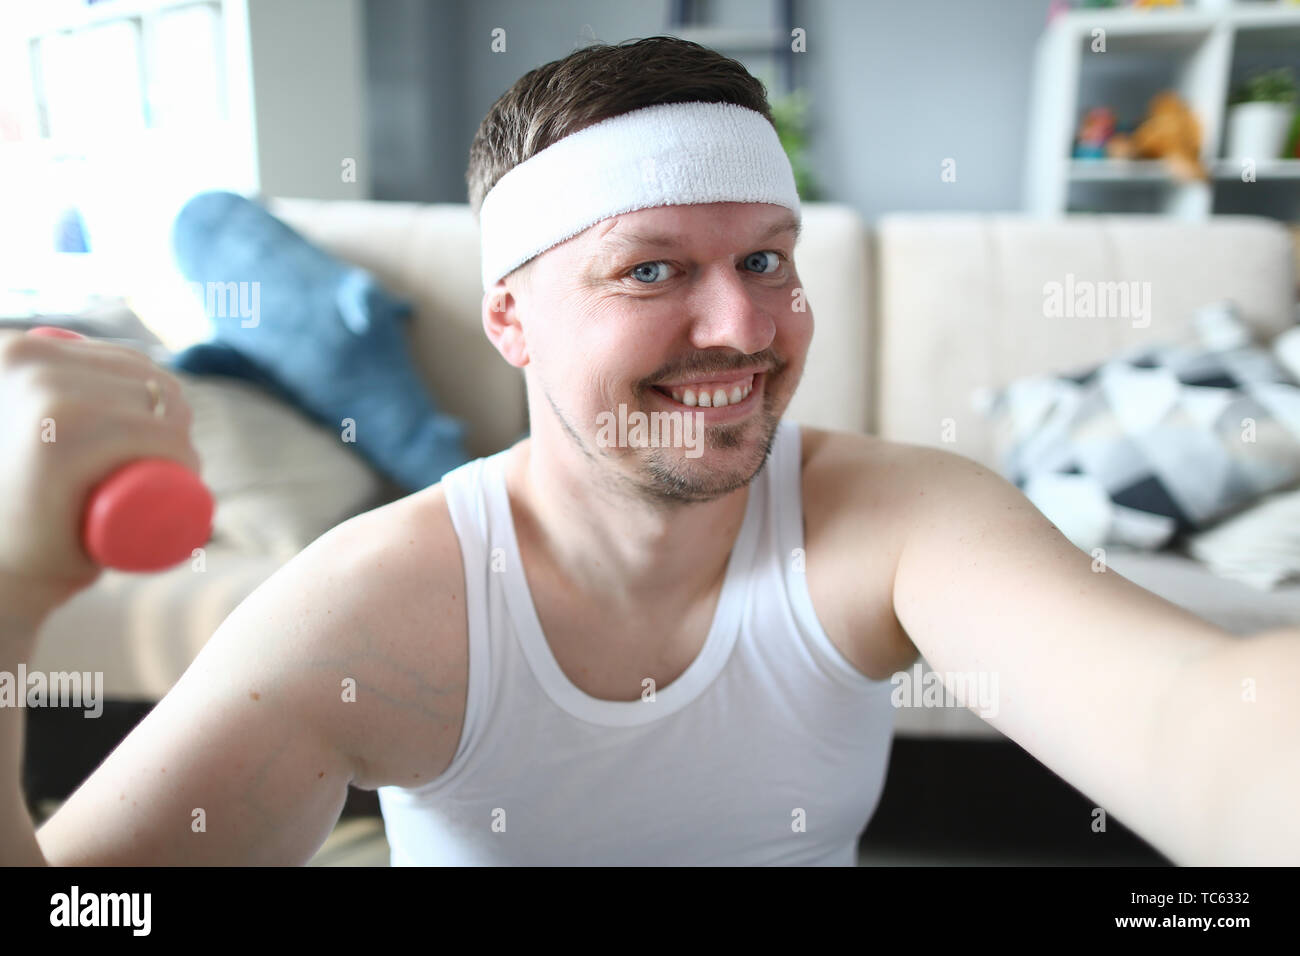 Smiling Sportsman with Dumbbell in Hand Portrait Stock Photo